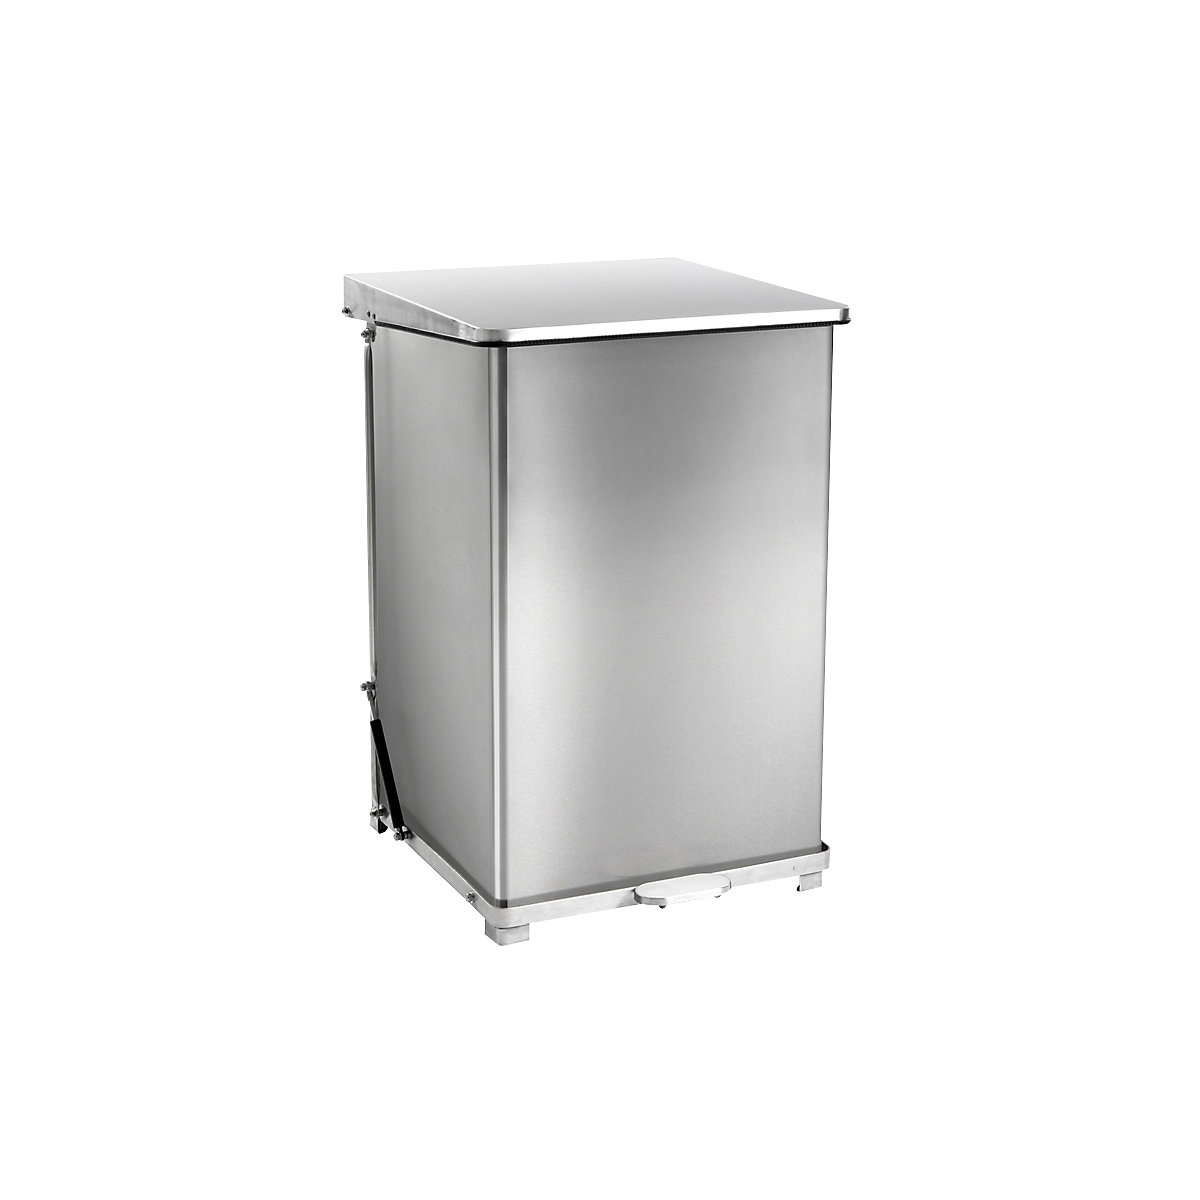 Industrial pedal bin, stainless steel, capacity 152 l, HxWxD 770 x 540 x 540 mm